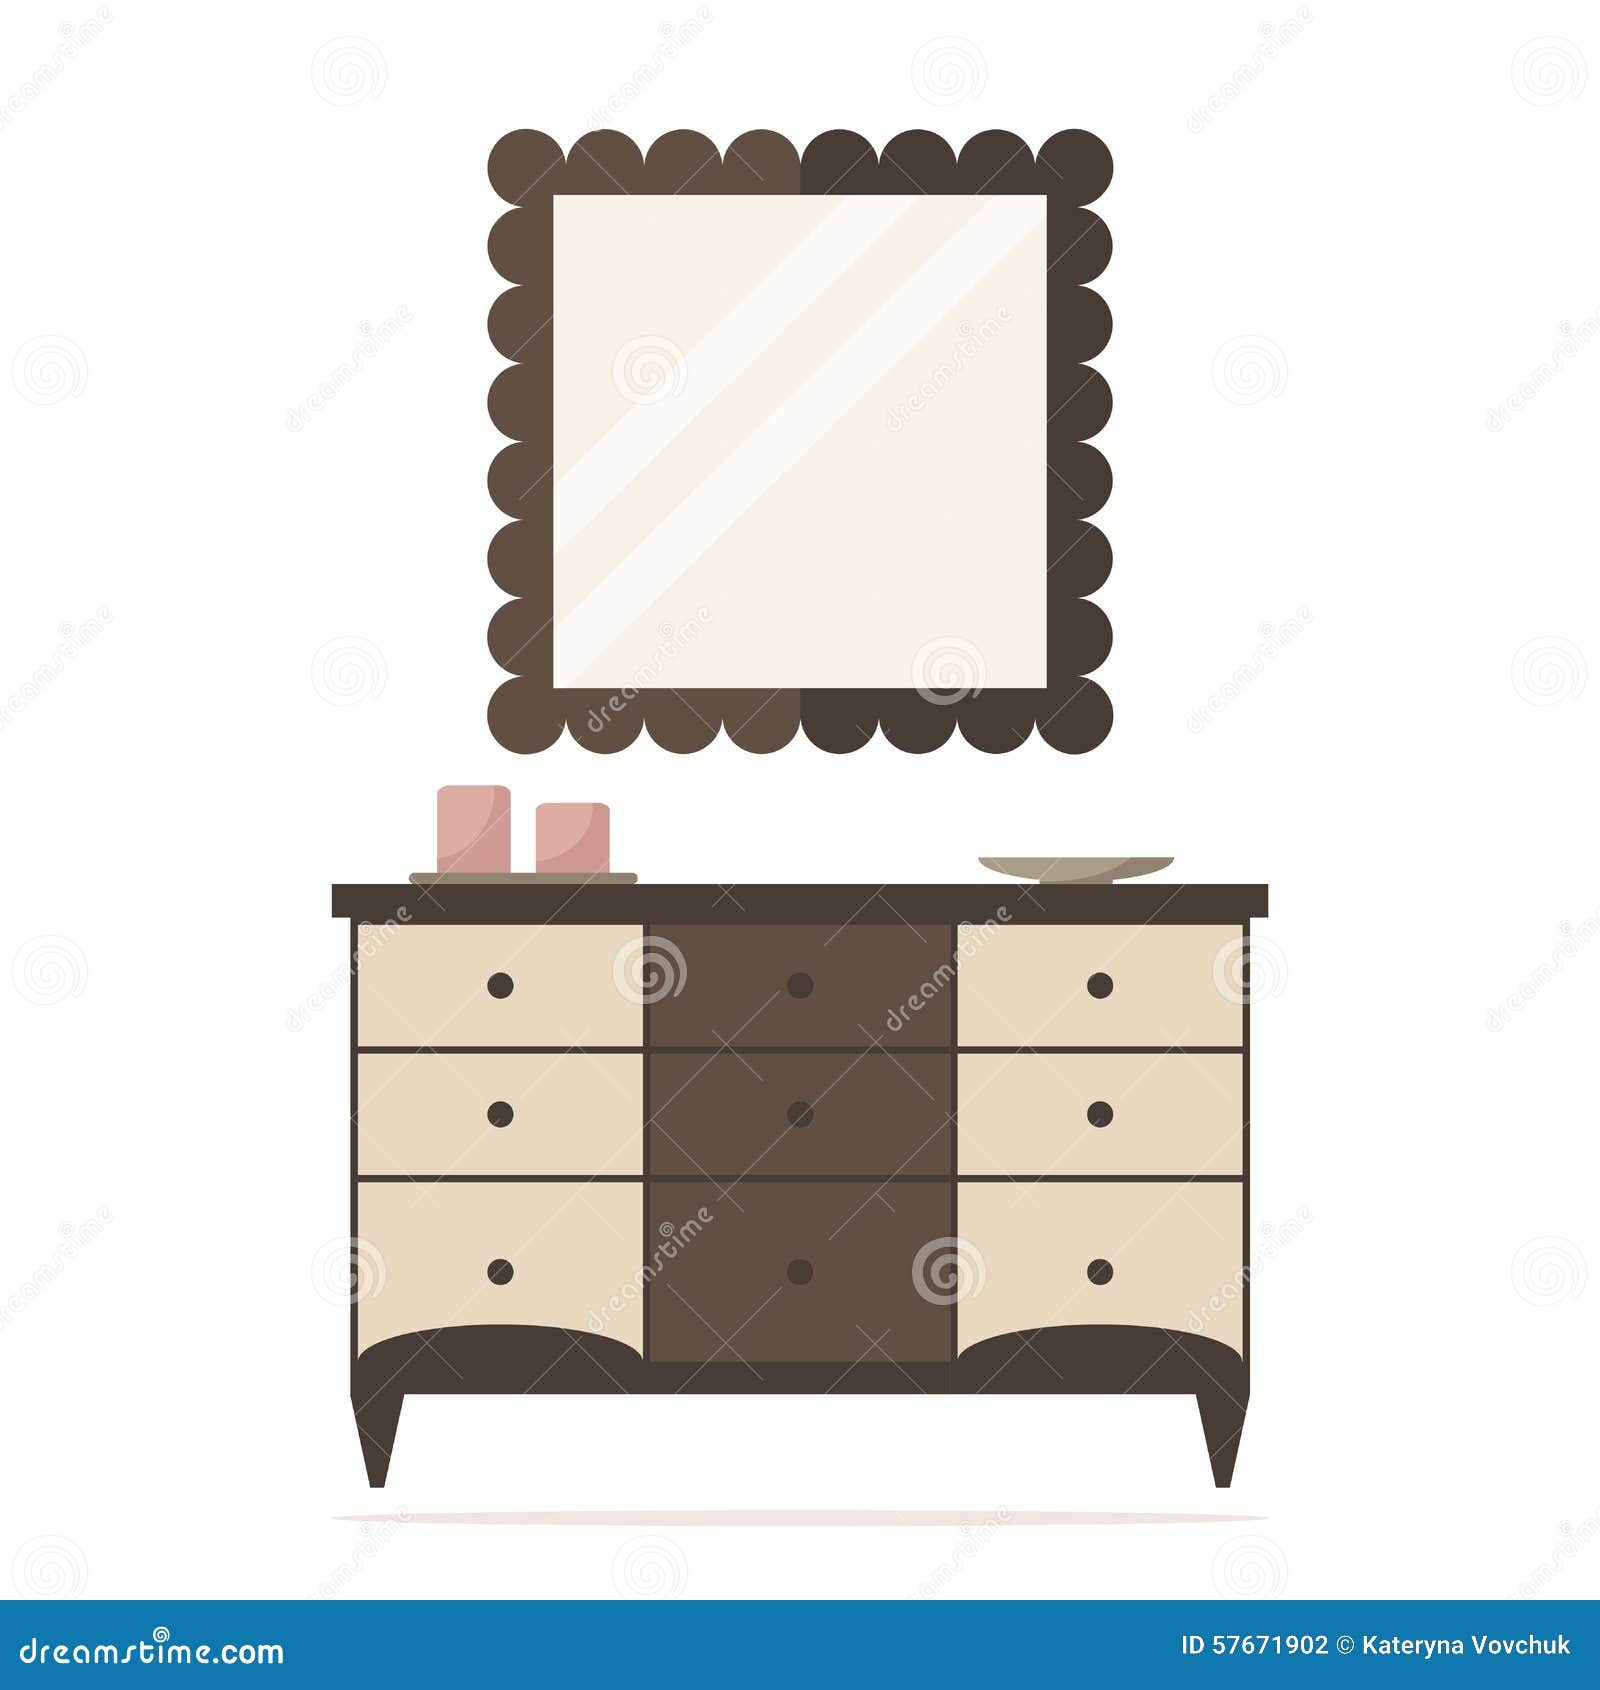 Chest Of Drawers Icon With Mirror And Decoration Bedroom Interior